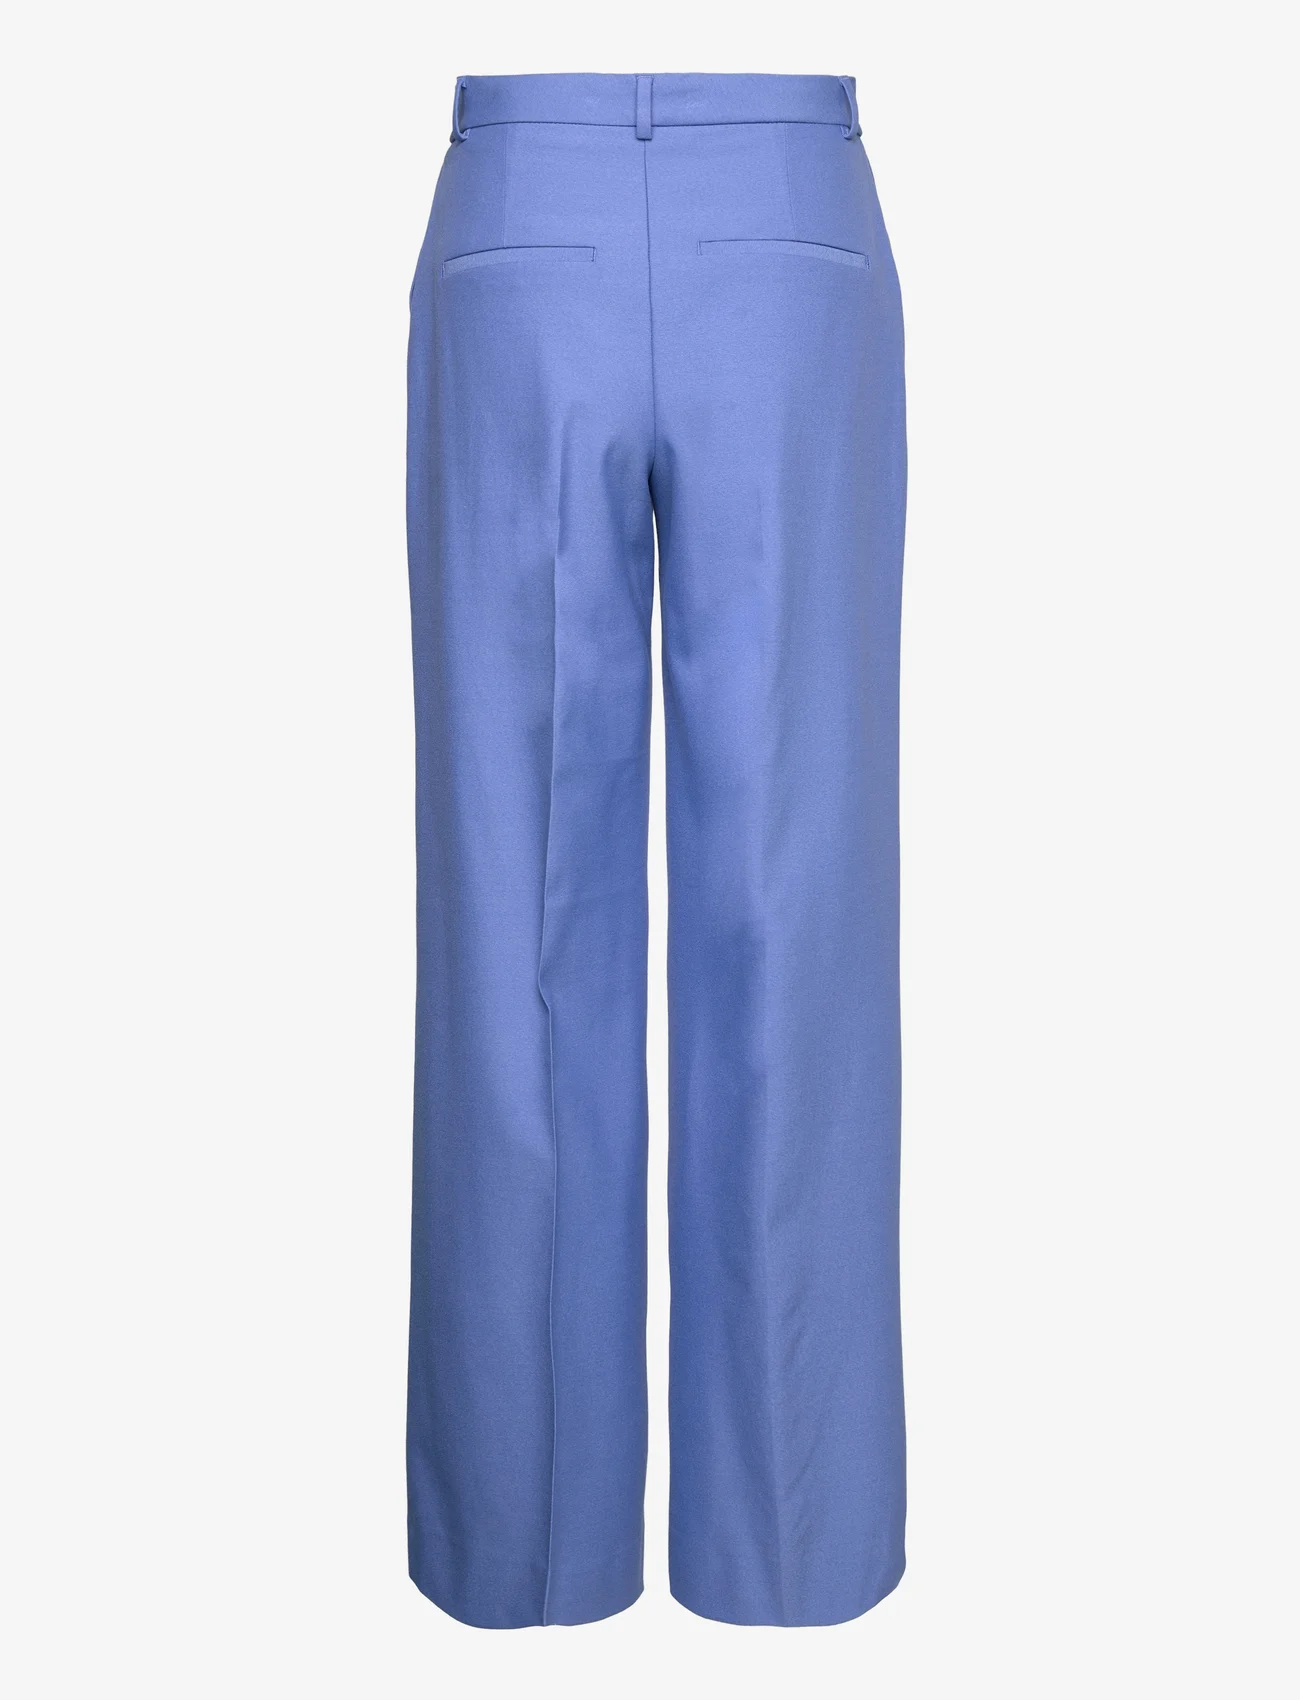 Selected Femme - SLFELIANA HW WIDE PANT N - party wear at outlet prices - ultramarine - 1